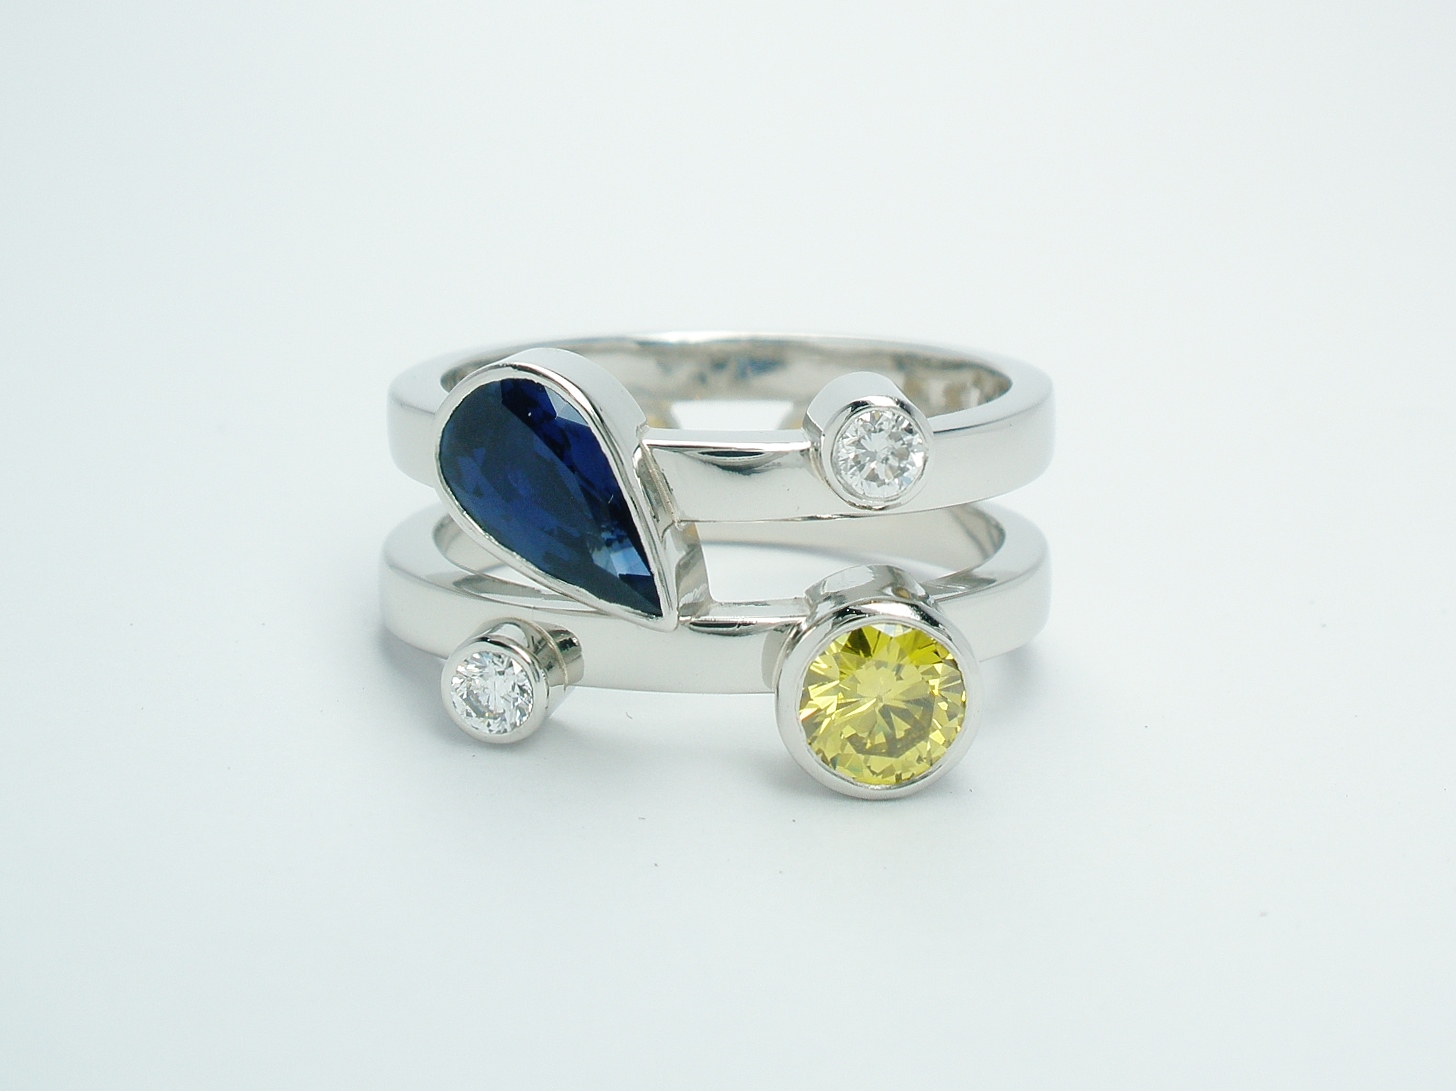 A platinum 4 stone pear sapphire, canary yellow & white round brilliant cut diamond twin parallel banded ring.